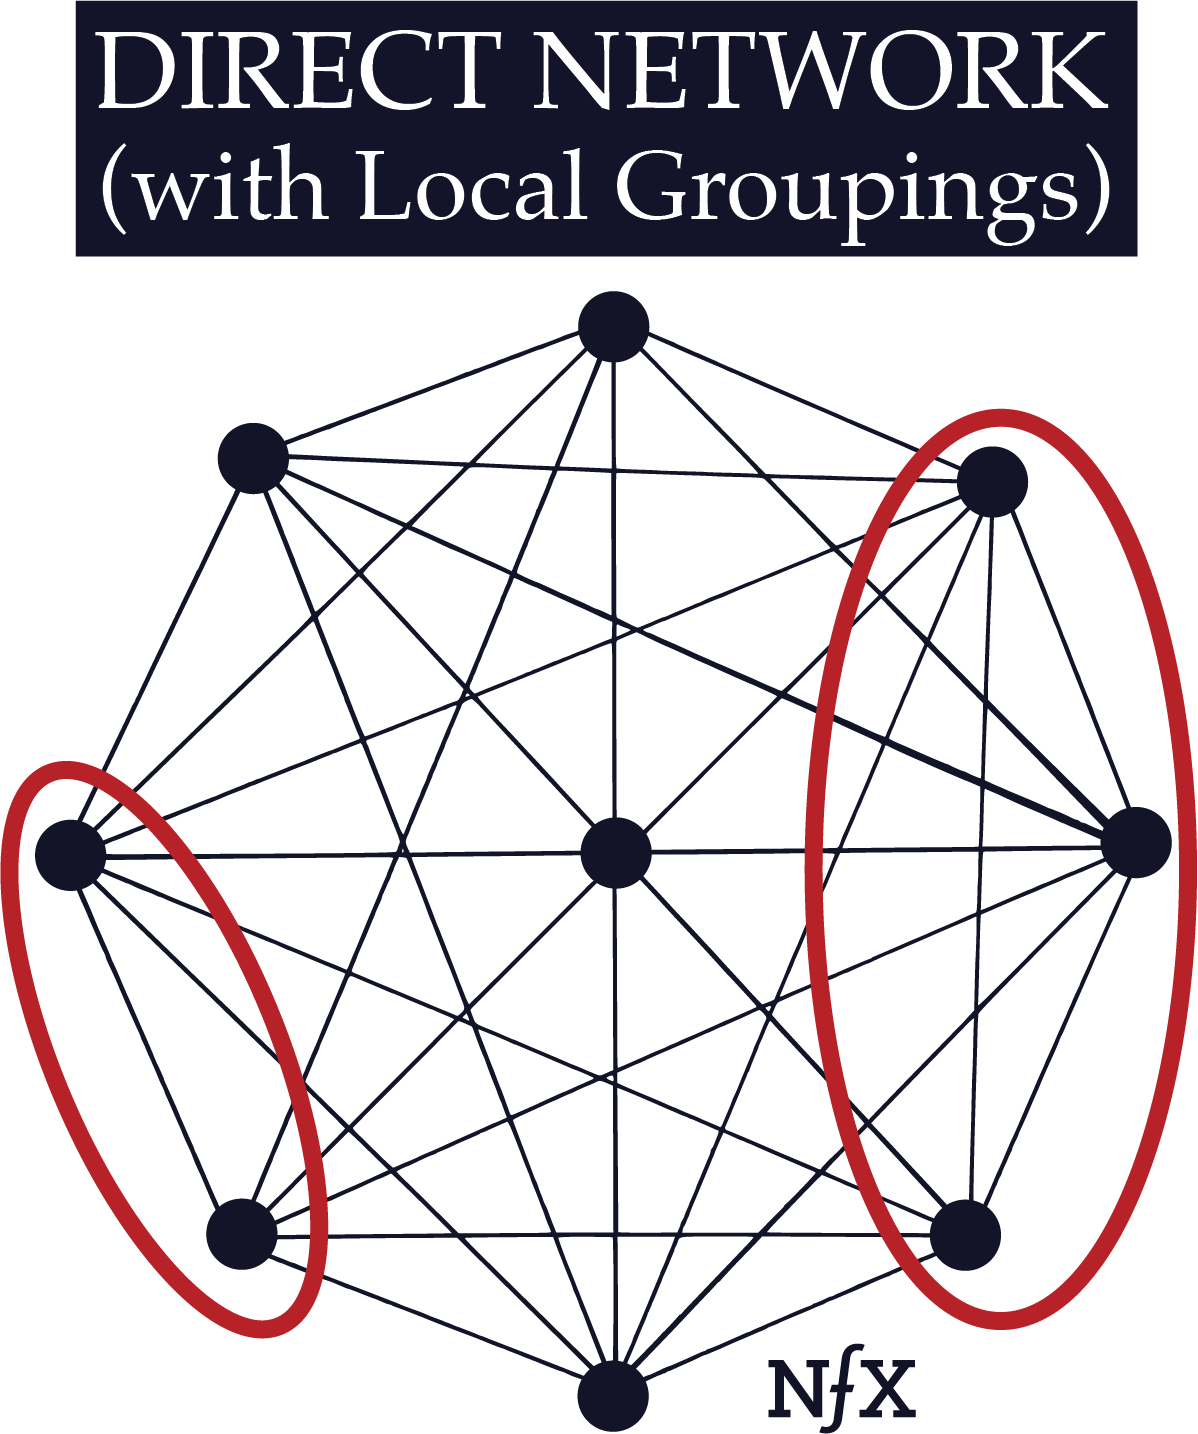 Direct Network with Local Groupings